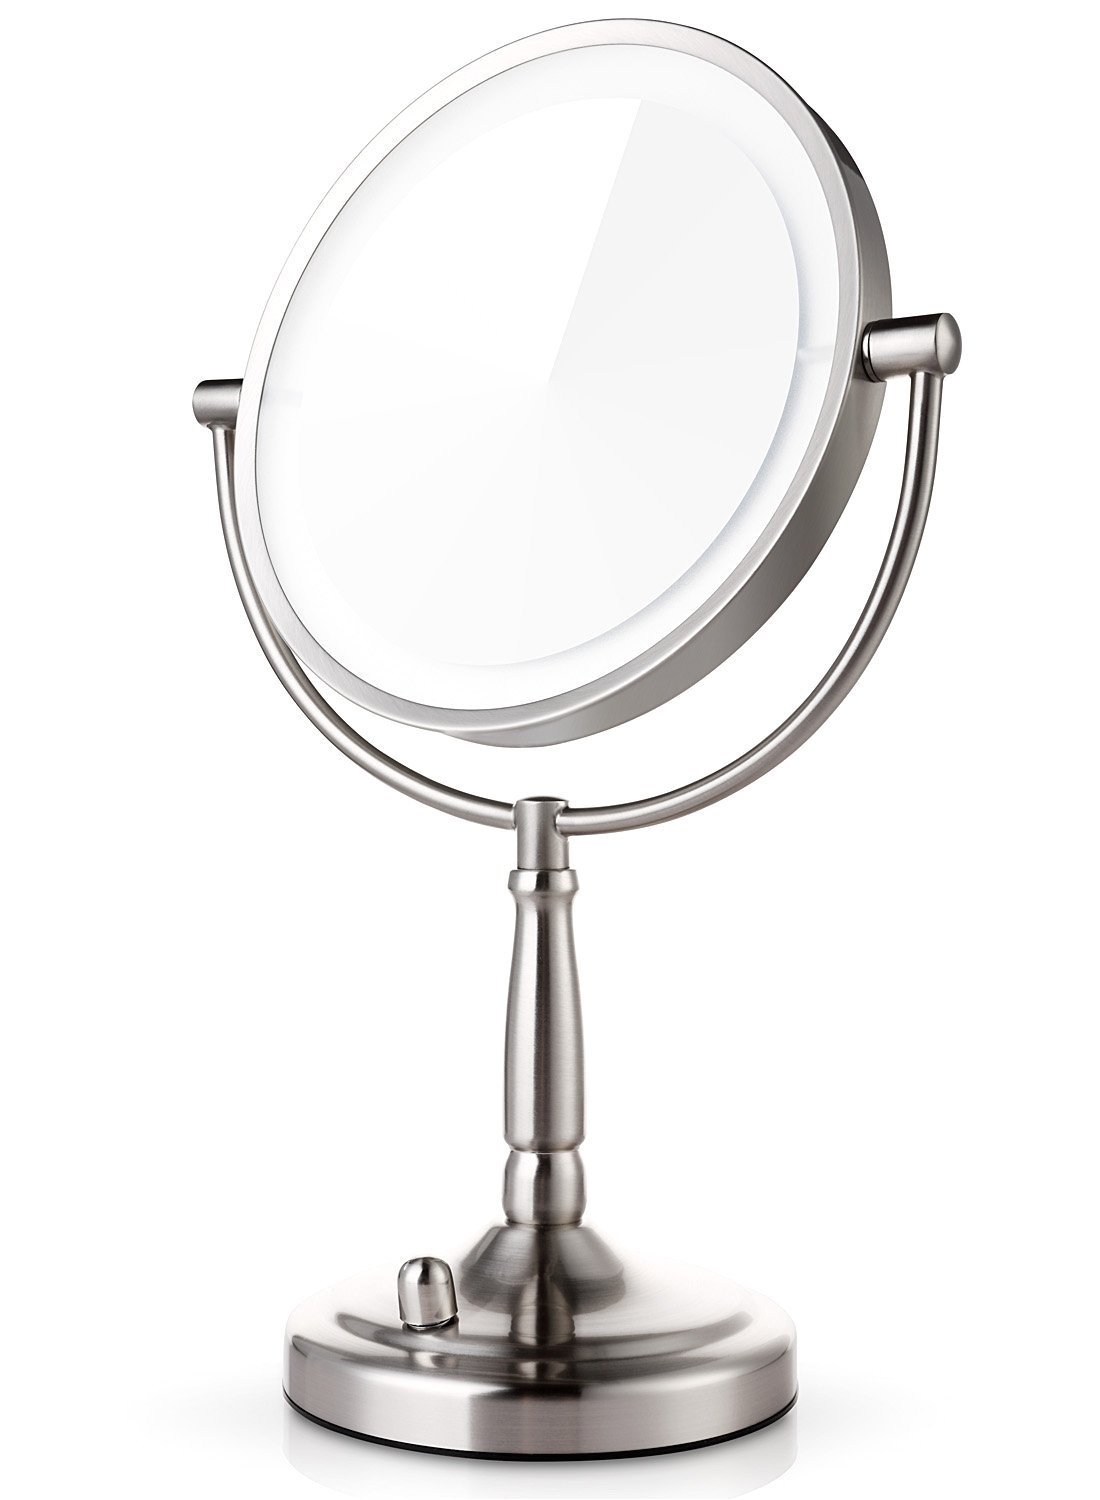 miusco 7x magnifying lighted makeup mirror 8 inch two sided white daylight led shadow free